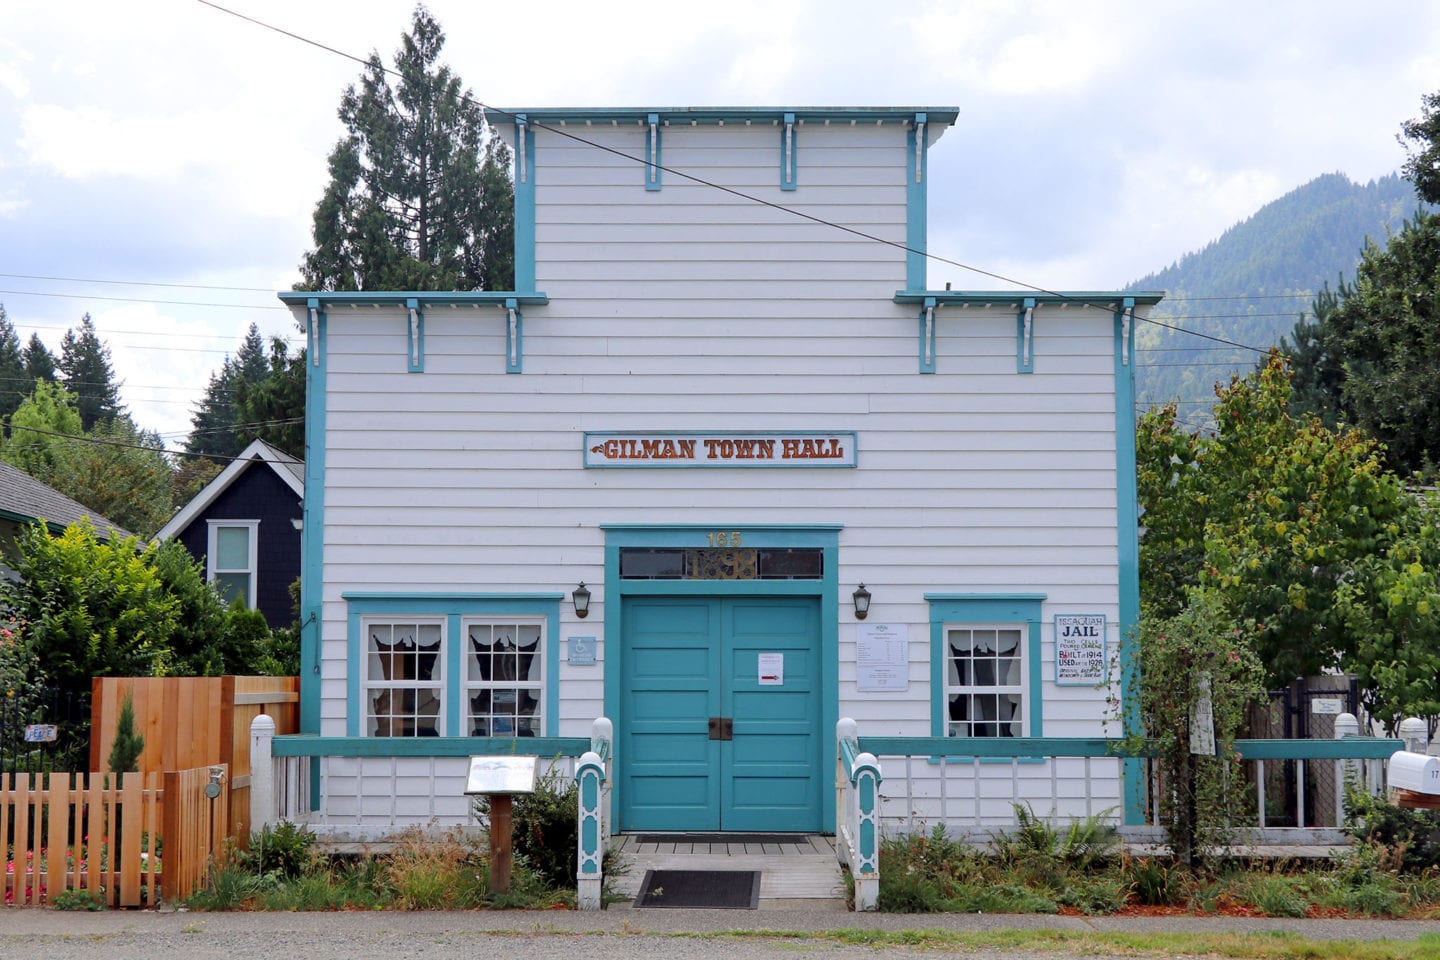 https://historylink.tours/wp-content/uploads/2019/07/Old-Gilman-Town-Hall-Issaquah-History-Museum-August-26-2019-HistoryLink-photo-by-David-Koch-1440x960.jpg